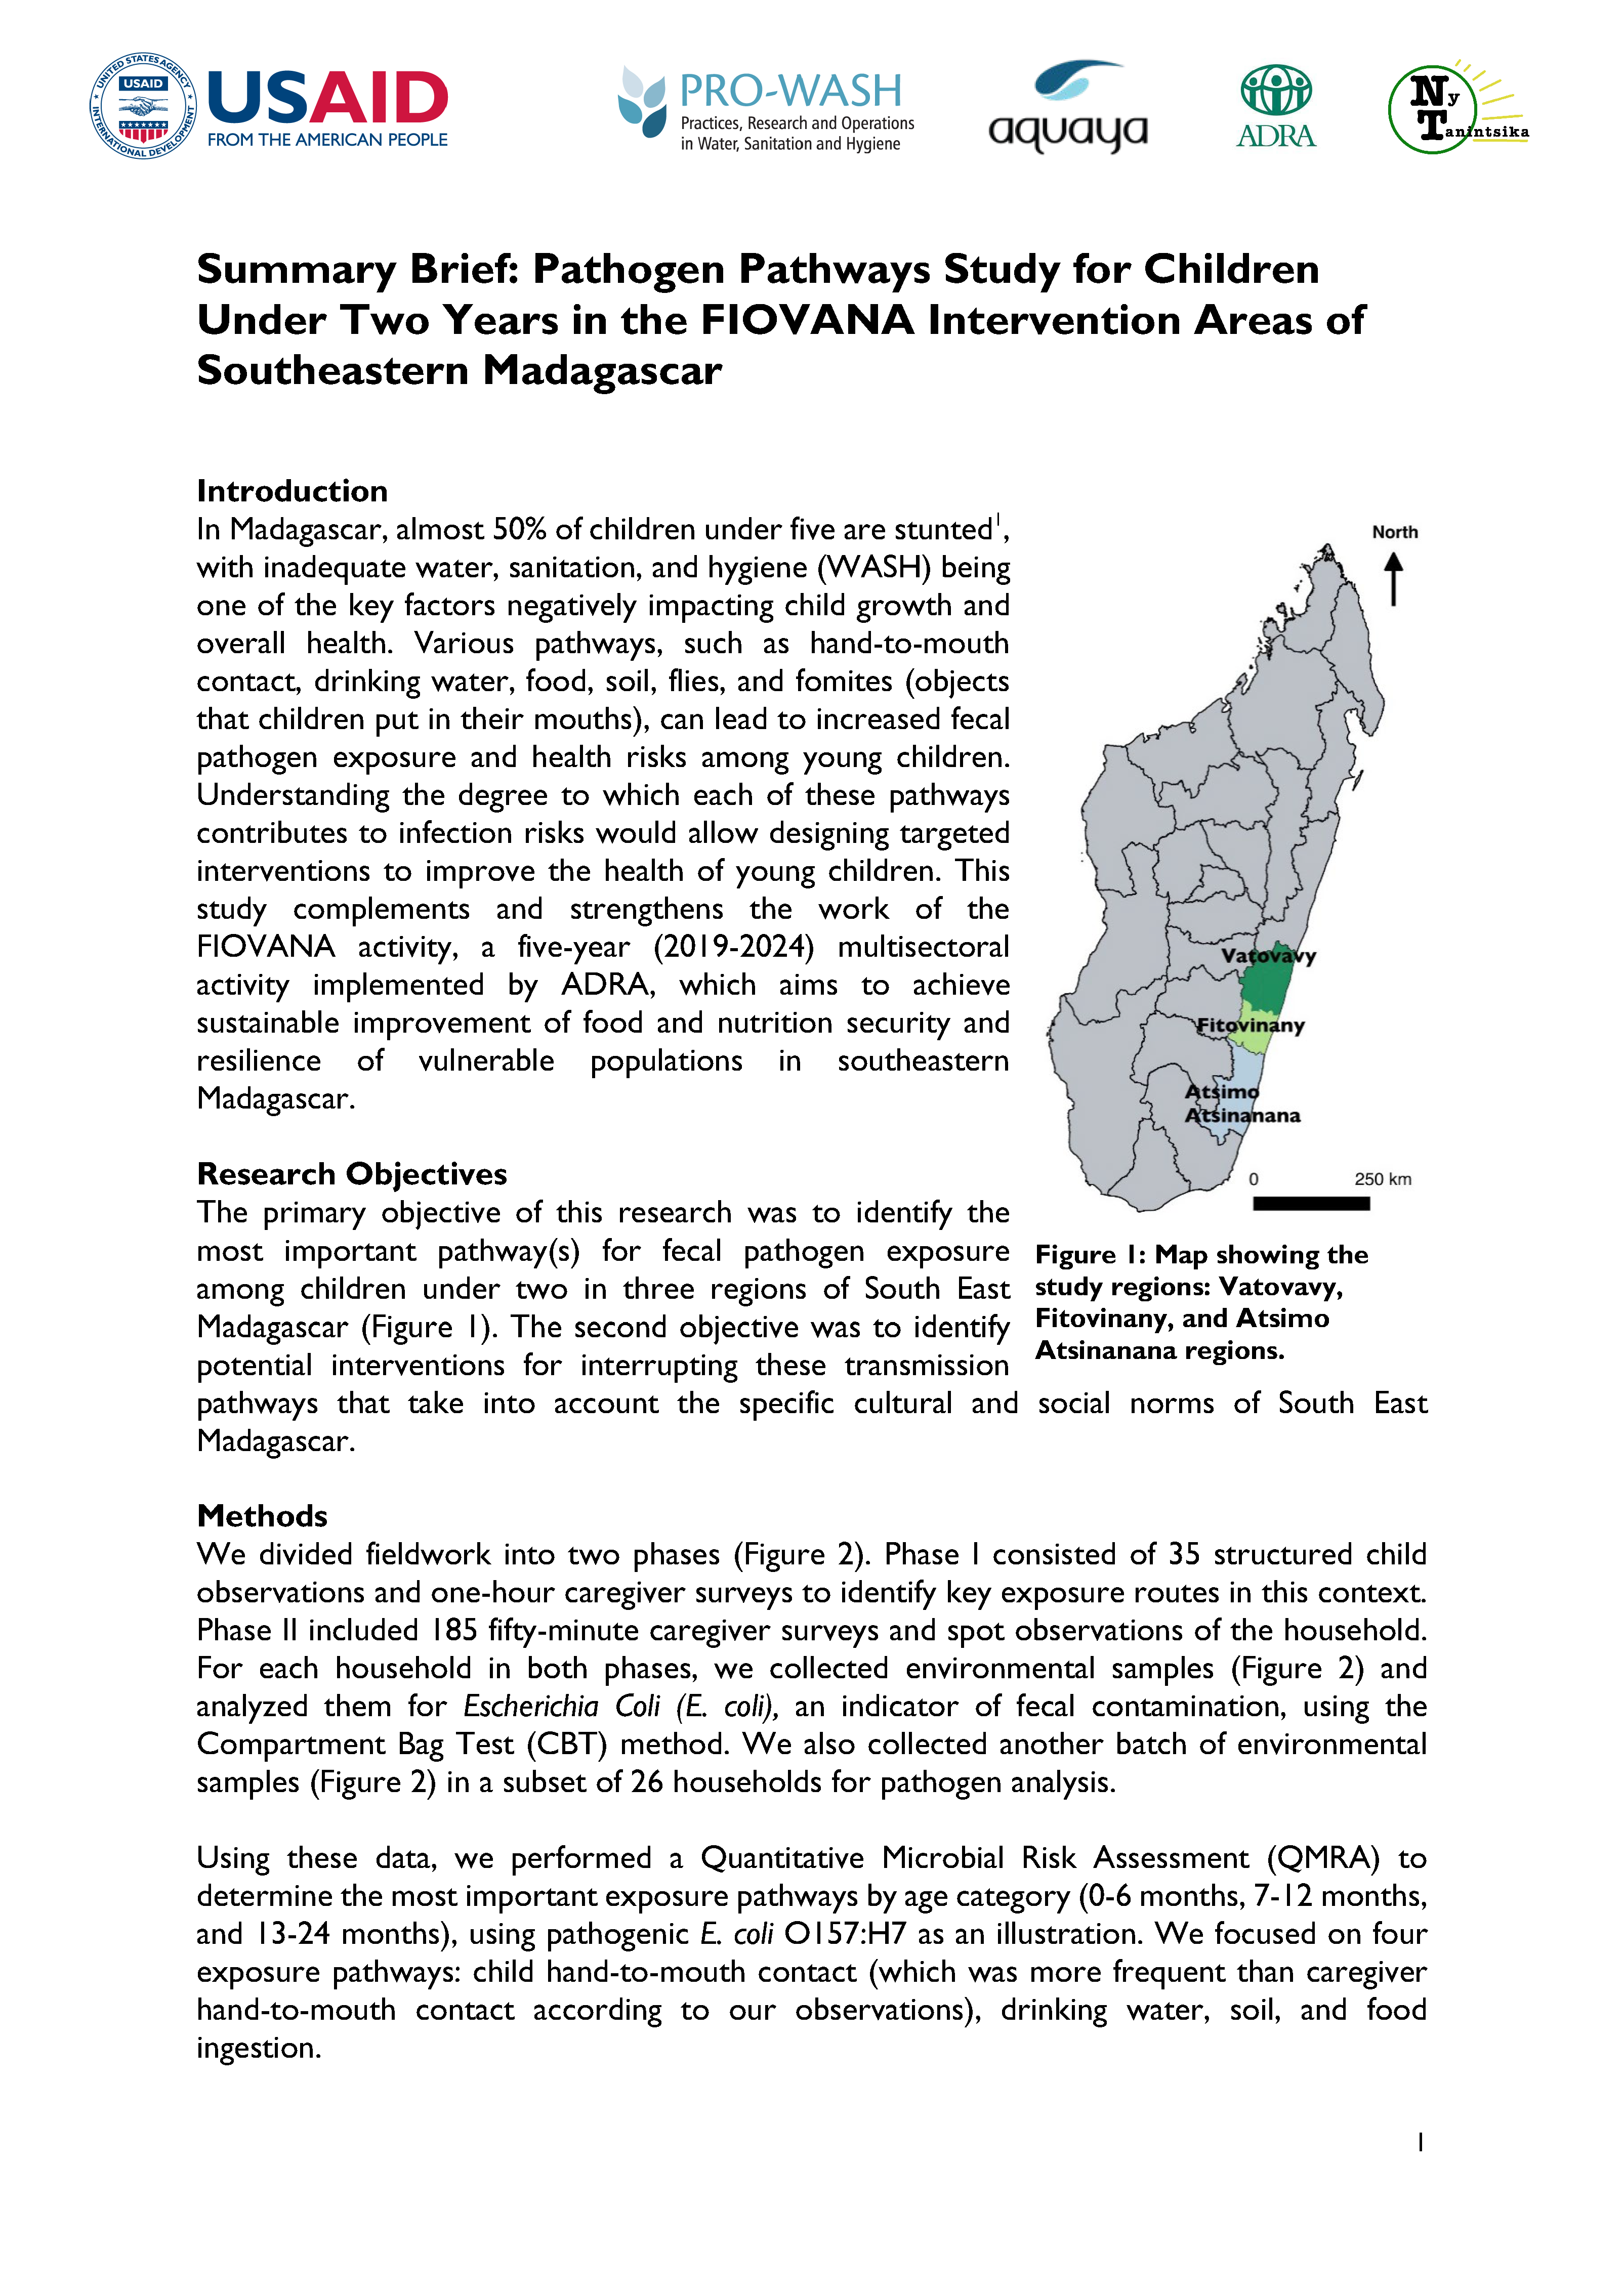 Cover page for Summary Brief: Pathogen Pathways Study for Children Under Two Years in the FIOVANA Intervention Areas of Southeastern Madagascar